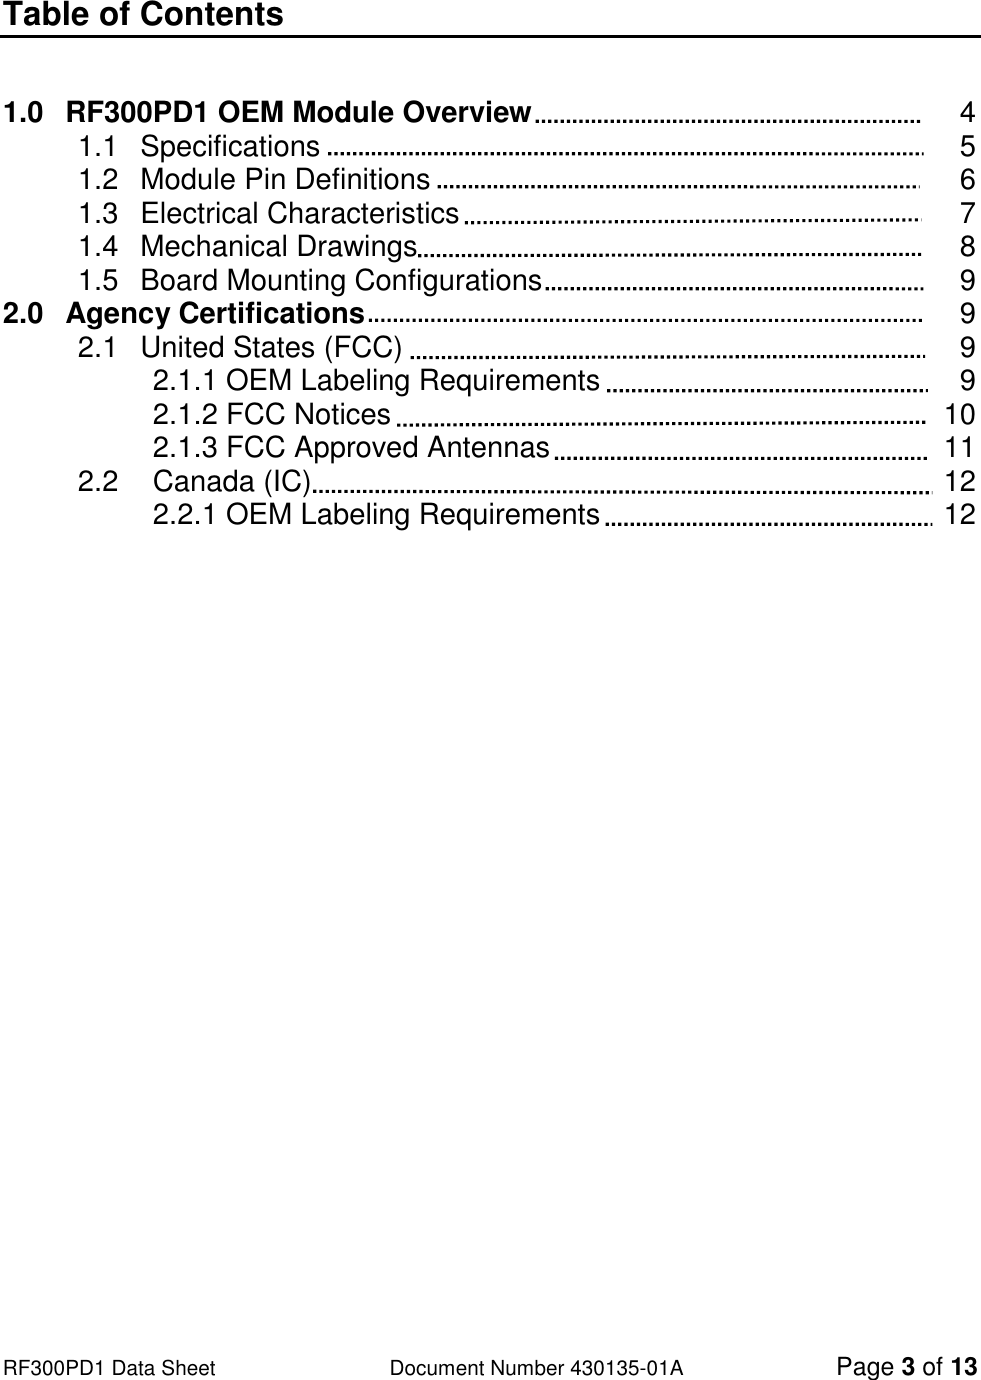                                                                                                                                                                          RF300PD1 Data Sheet                   Document Number 430135-01A Page 3 of 13  Table of Contents      1.0  RF300PD1 OEM Module Overview                 4 1.1  Specifications                       5 1.2  Module Pin Definitions                     6 1.3  Electrical Characteristics                   7 1.4  Mechanical Drawings                     8 1.5  Board Mounting Configurations                 9 2.0  Agency Certifications                      9 2.1  United States (FCC)                     9   2.1.1 OEM Labeling Requirements                9   2.1.2 FCC Notices                   10   2.1.3 FCC Approved Antennas               11 2.2  Canada (IC)                     12   2.2.1 OEM Labeling Requirements              12    